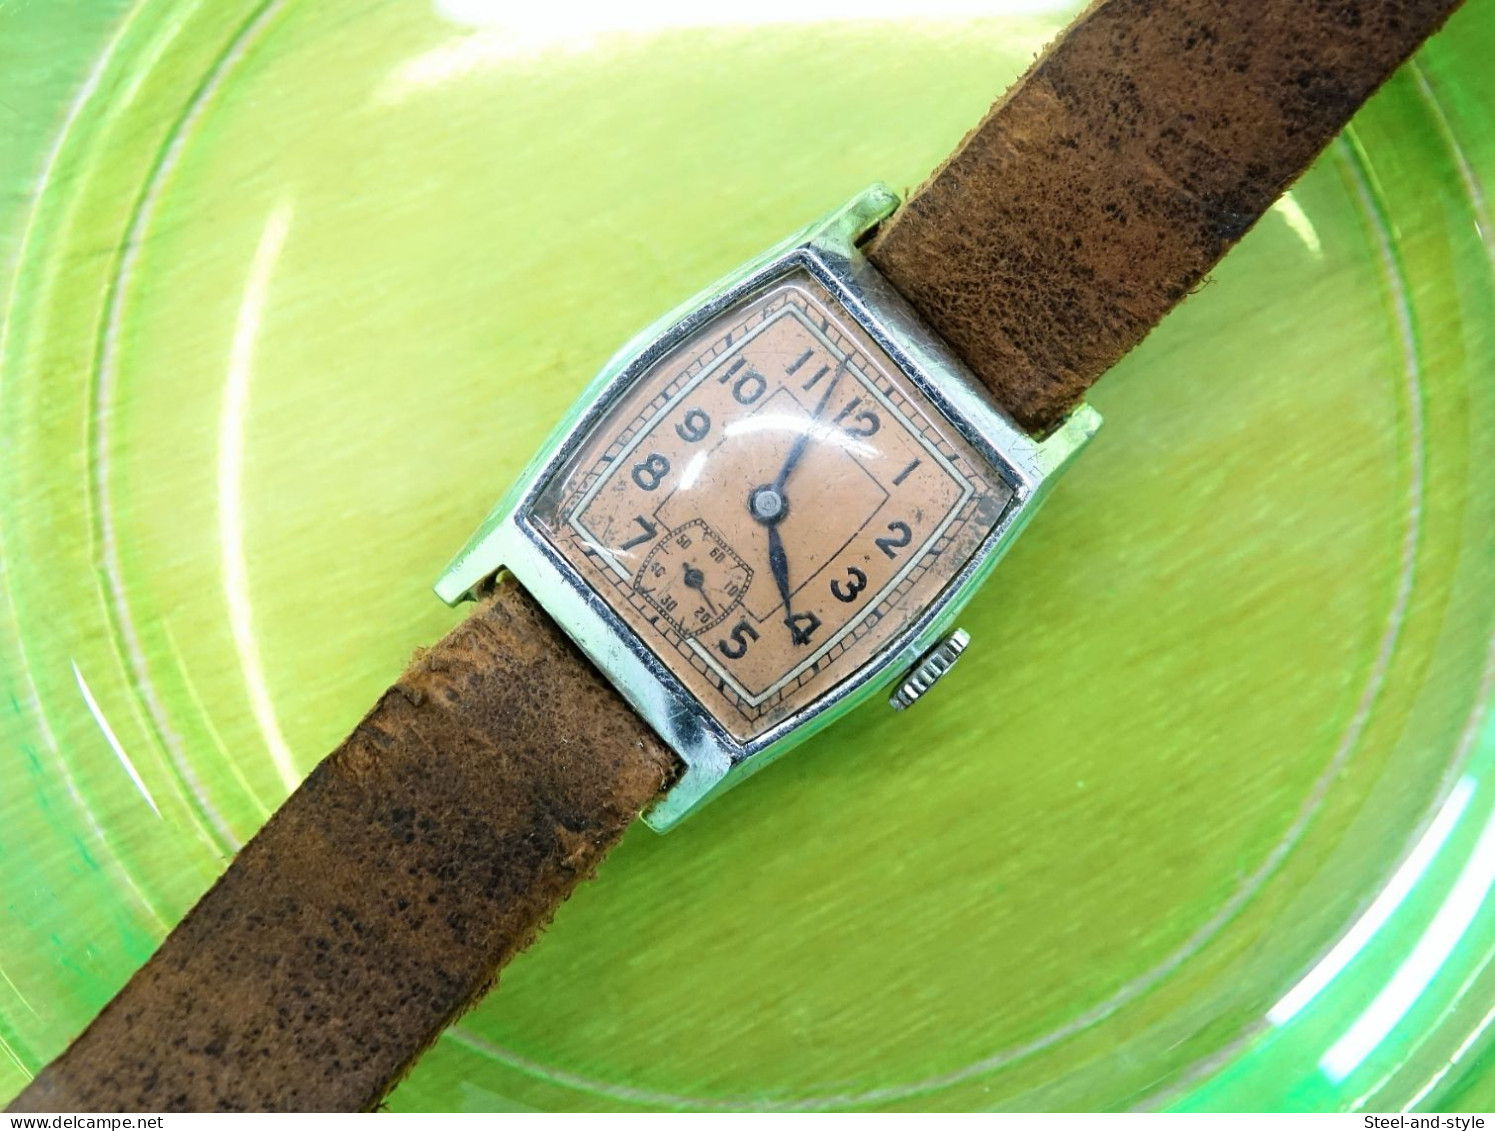 Watches : OMICRA TANK ART DECO WITH HAND MADE BAND - 1940's - Original  - Running - Excelent Condition - Orologi Moderni